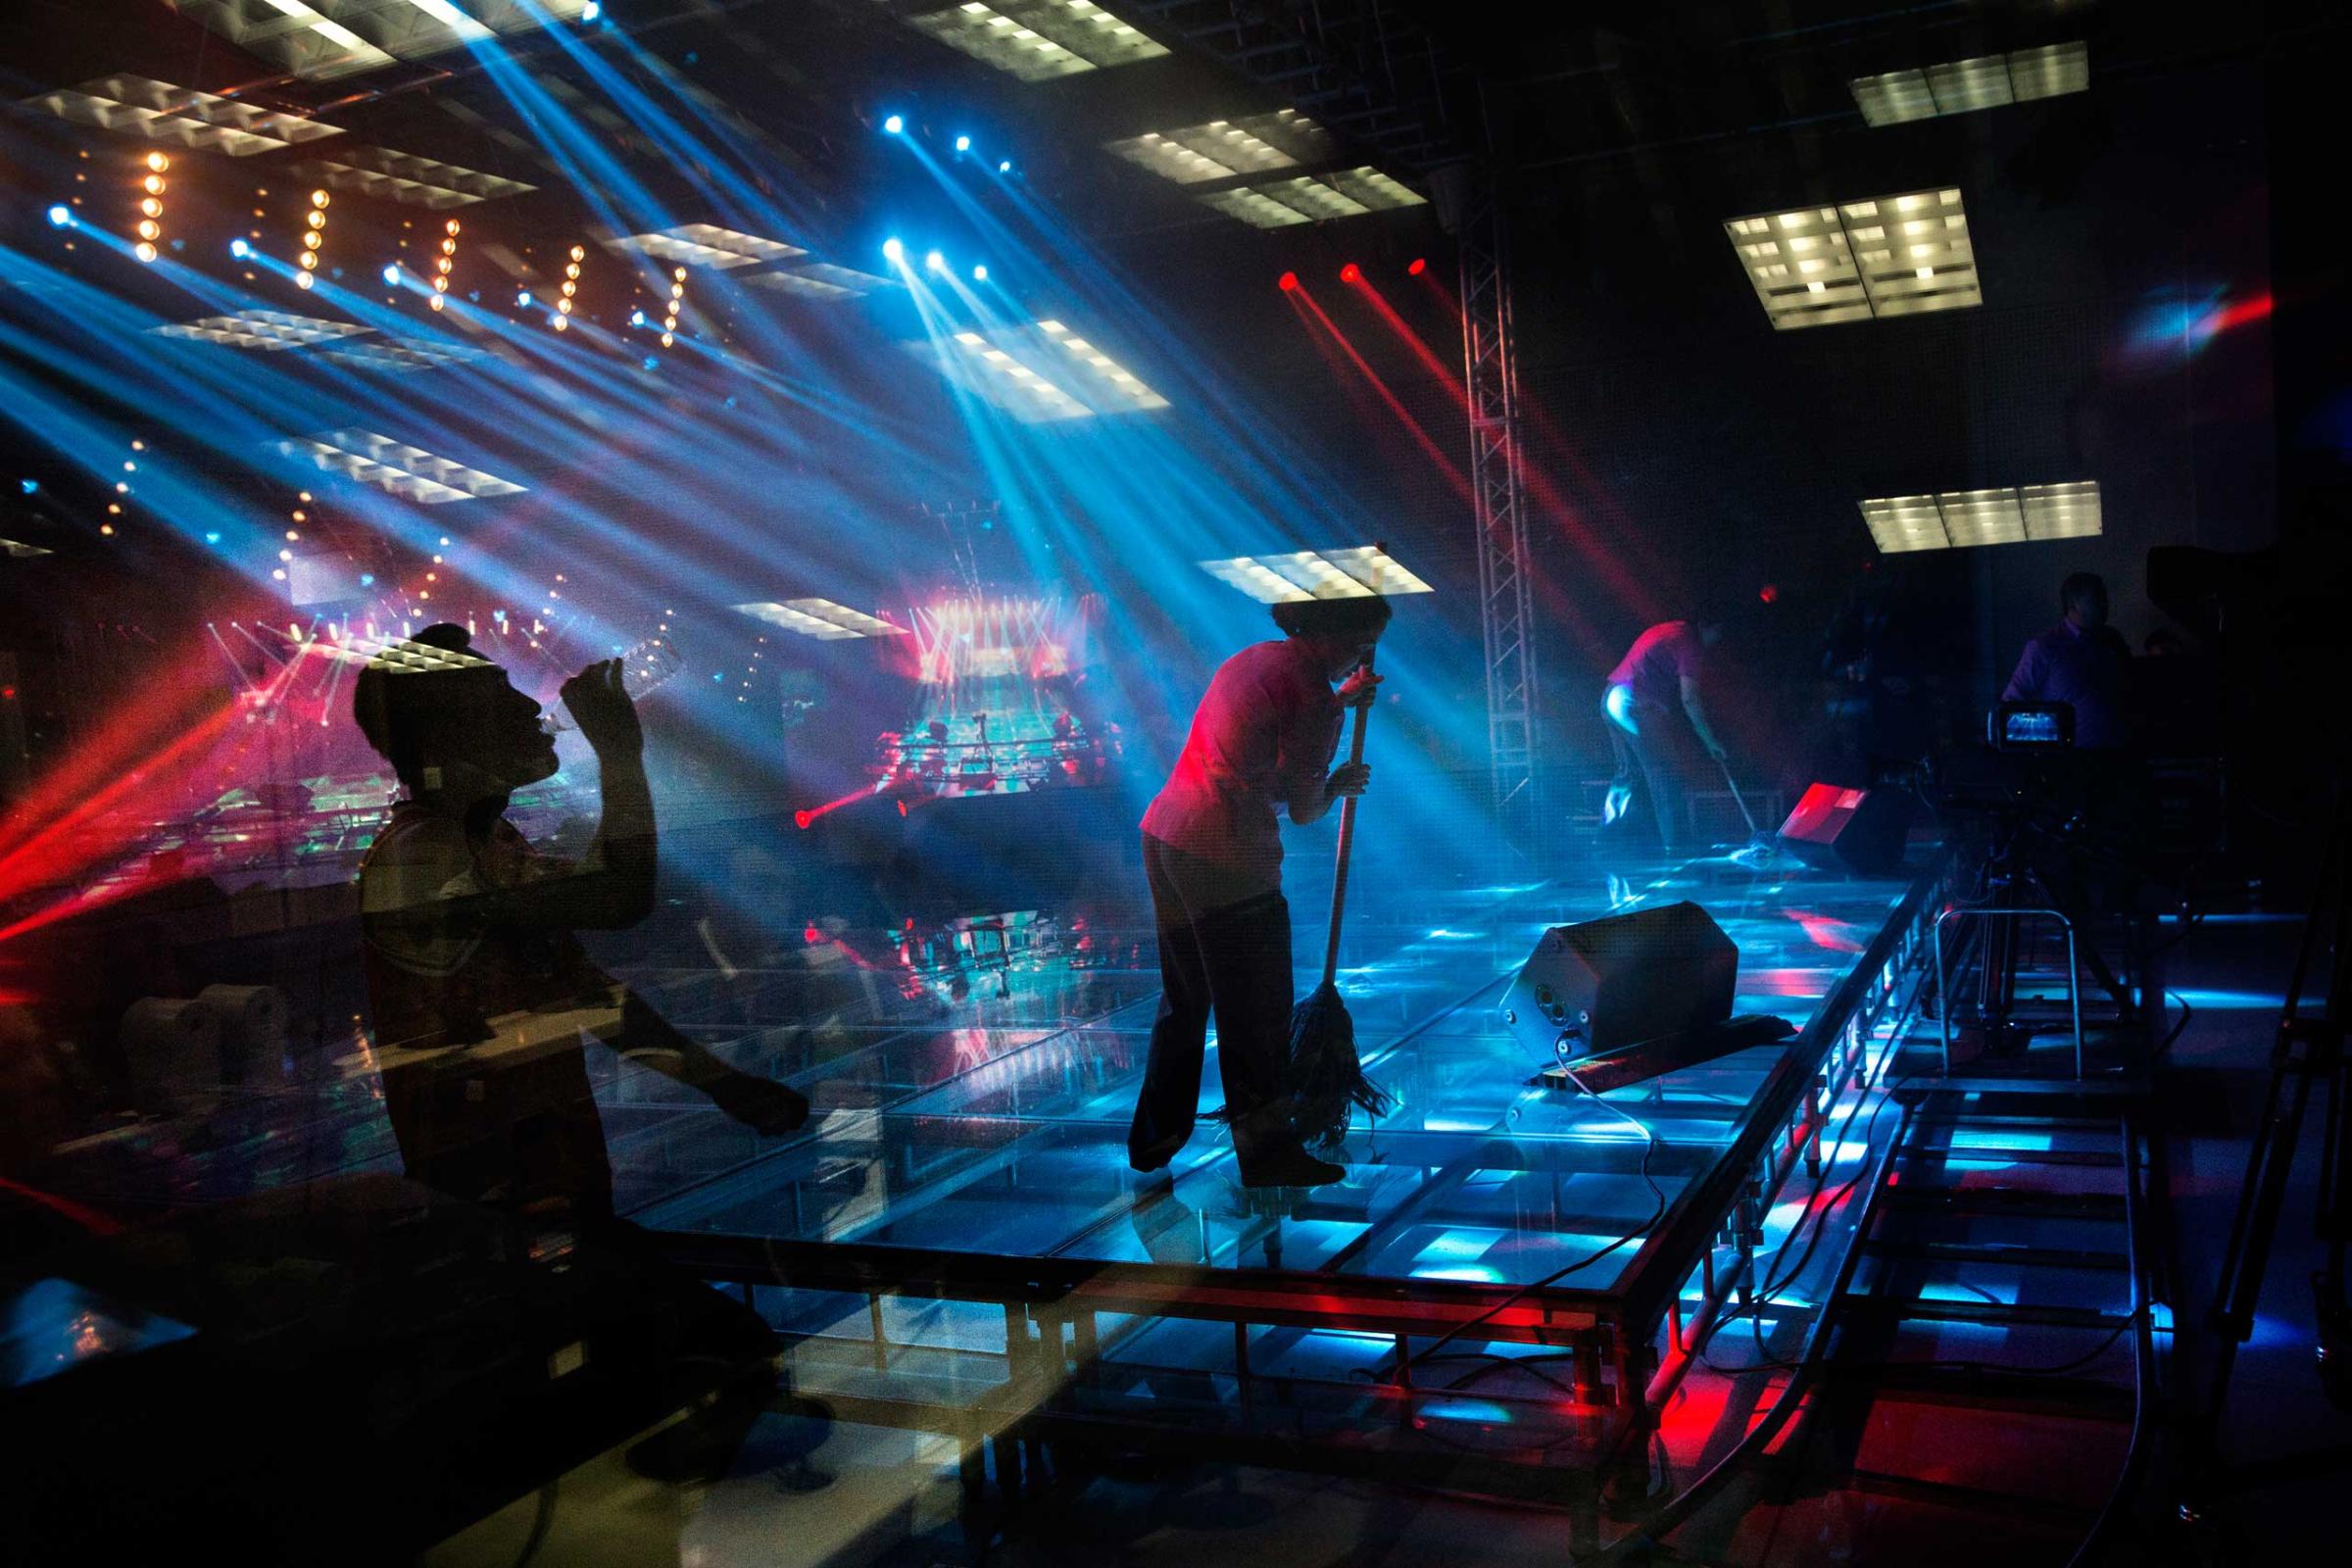 Cleaners and crew of Uighur pop sensation Ablajan clean the stage during rehearsals for a planned live webcast concert scheduled for that afternoon in Urumqi, China on July 31st, 2014. The performance, held at a state owned broadcasting facility, which Ablajan and his dancers had been preparing for for several weeks, was cancelled an hour before show time. The official reason was due to technical problems but members of the performance admitted it was more likely due to political sensitivities following the recent unrest between Uighurs and Han authorities in Xinjiang.